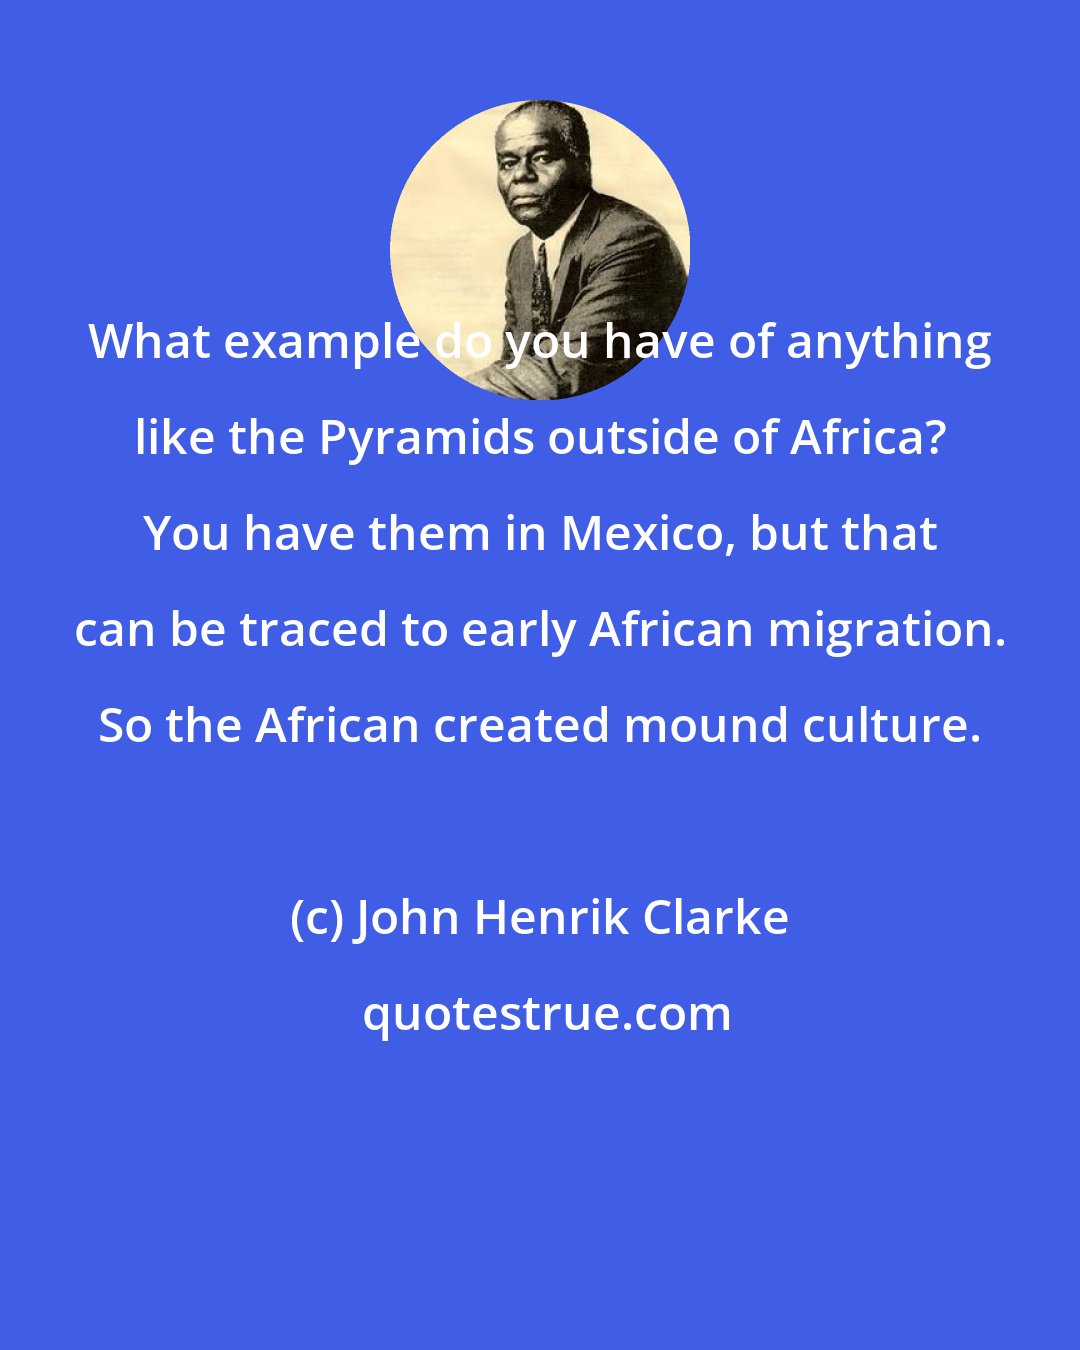 John Henrik Clarke: What example do you have of anything like the Pyramids outside of Africa? You have them in Mexico, but that can be traced to early African migration. So the African created mound culture.